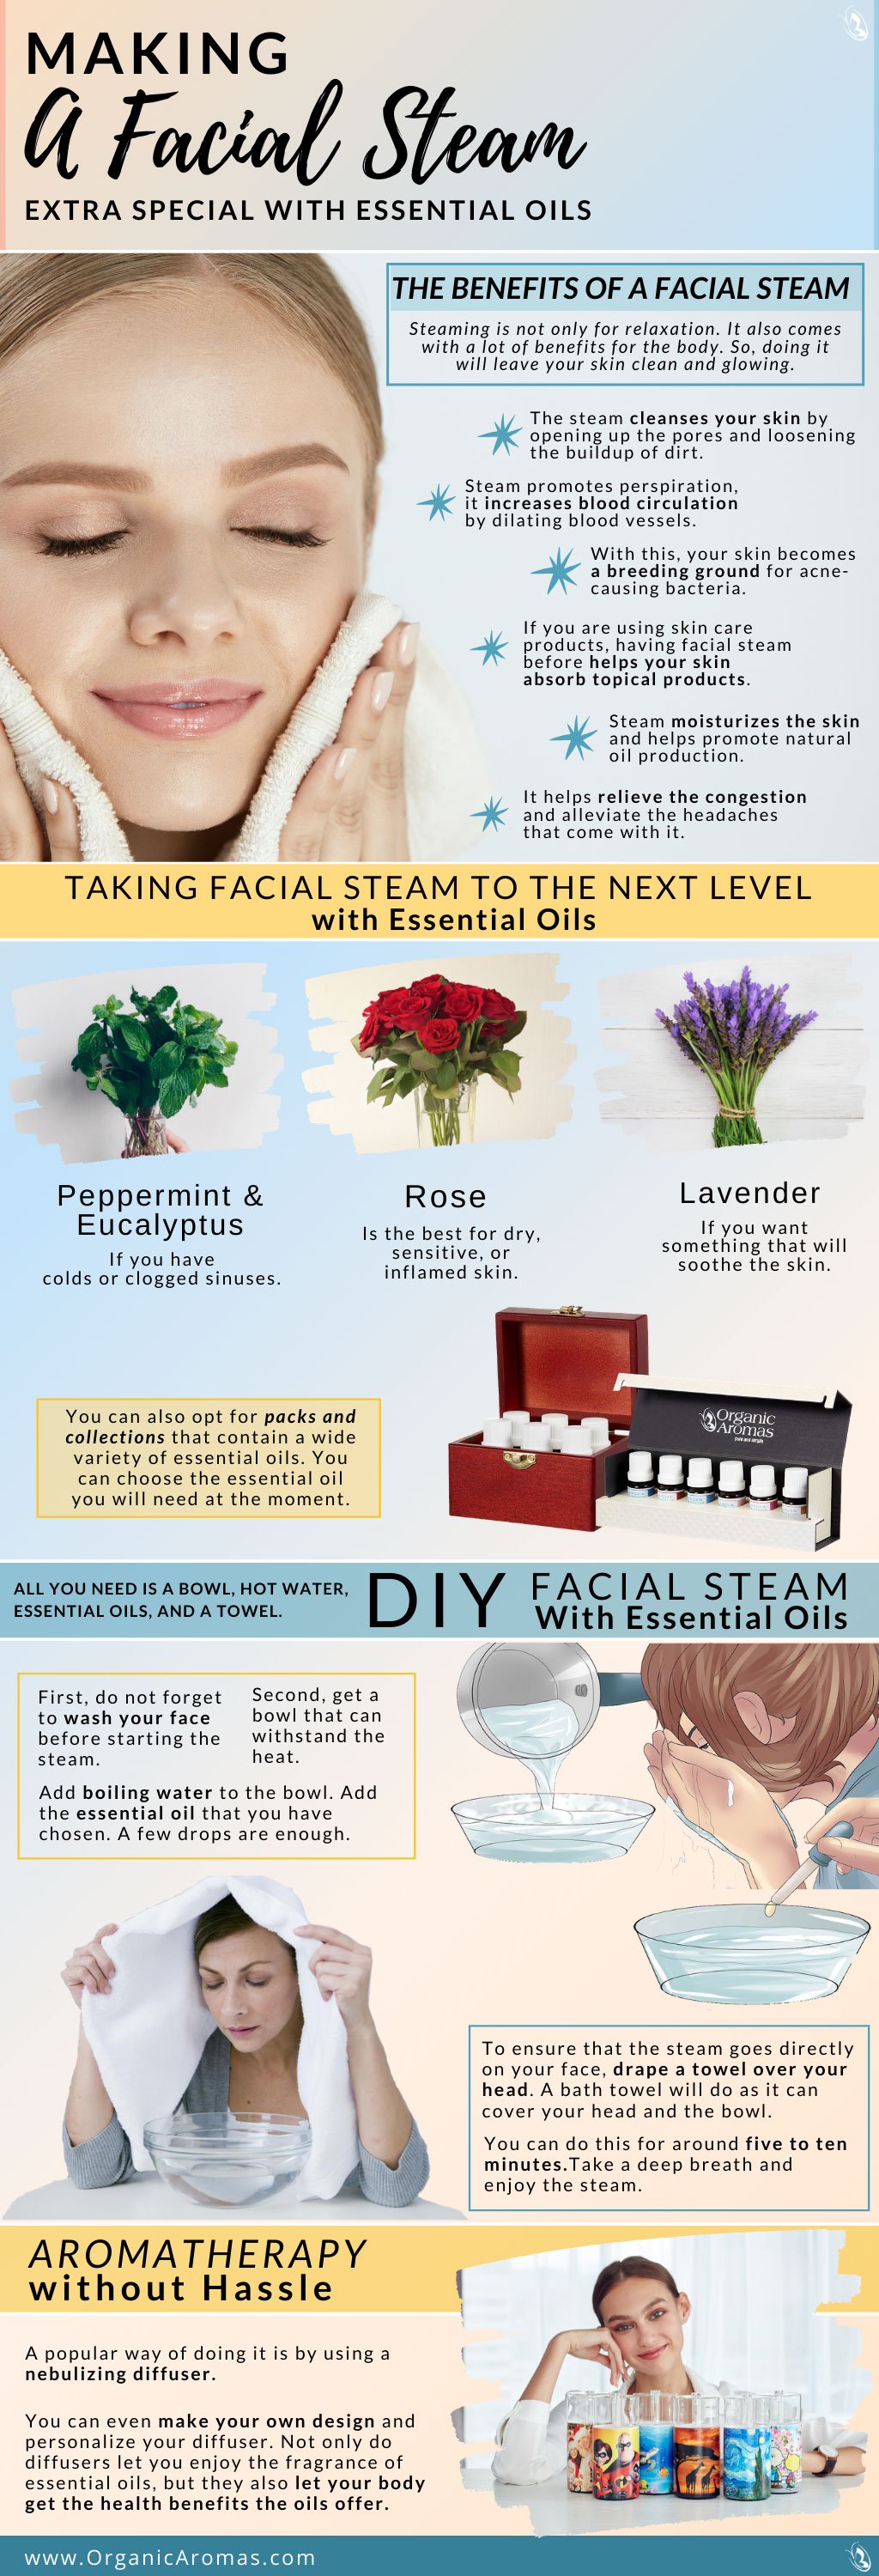 6 Facial Steaming Benefits - How to Use A Facial Steamer